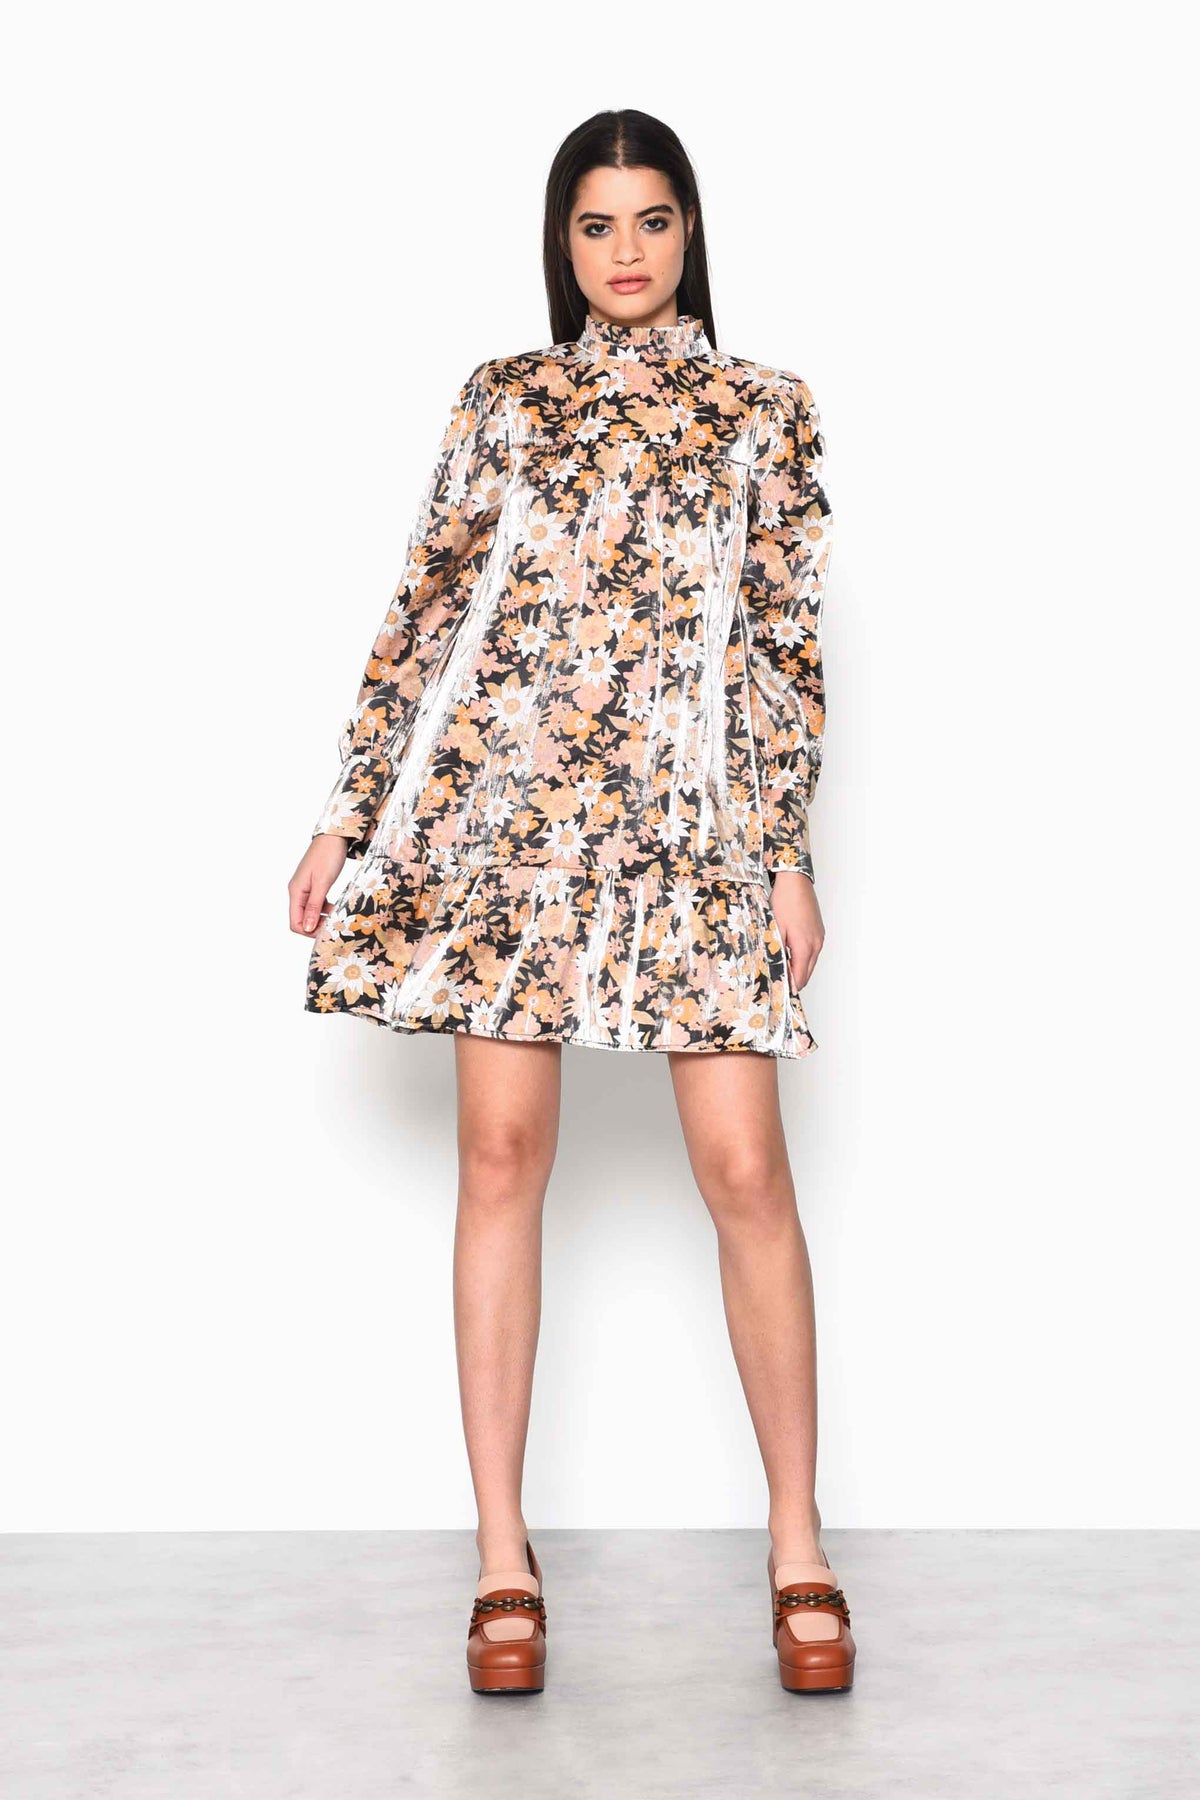 Glamorous Black Gold Multi Floral High Neck Mini Dress with Gathered Tiers and Sleeves